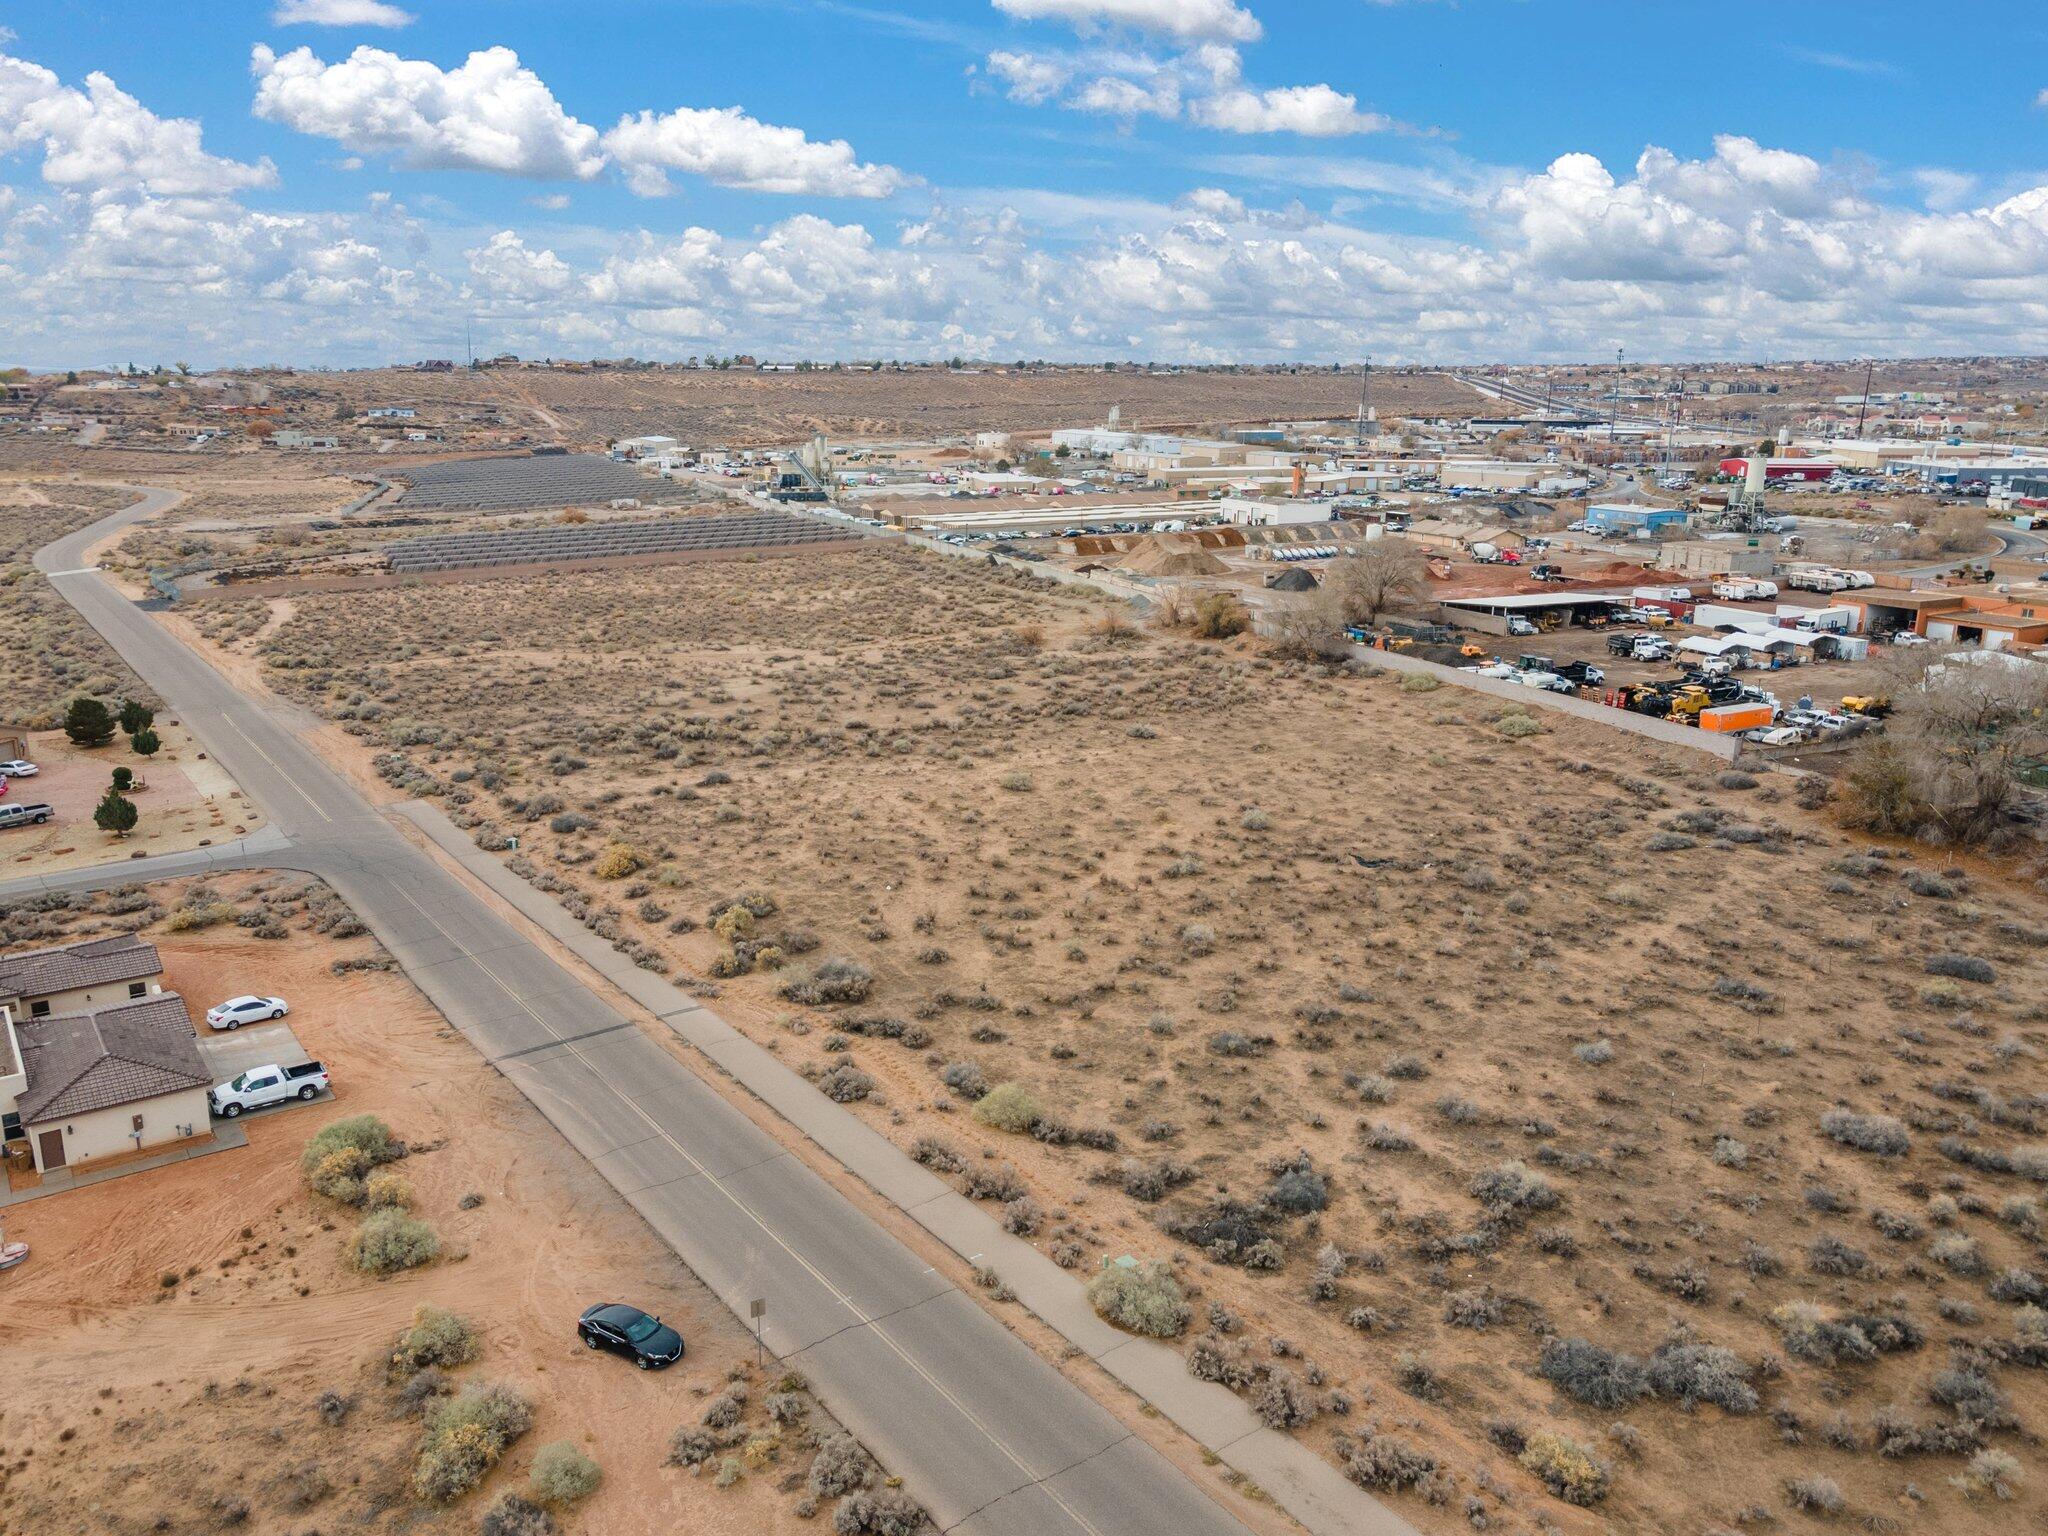 Lot 4 Don Julio Road, Corrales, New Mexico 87048, ,Land,For Sale,Lot 4 Don Julio Road,1053856